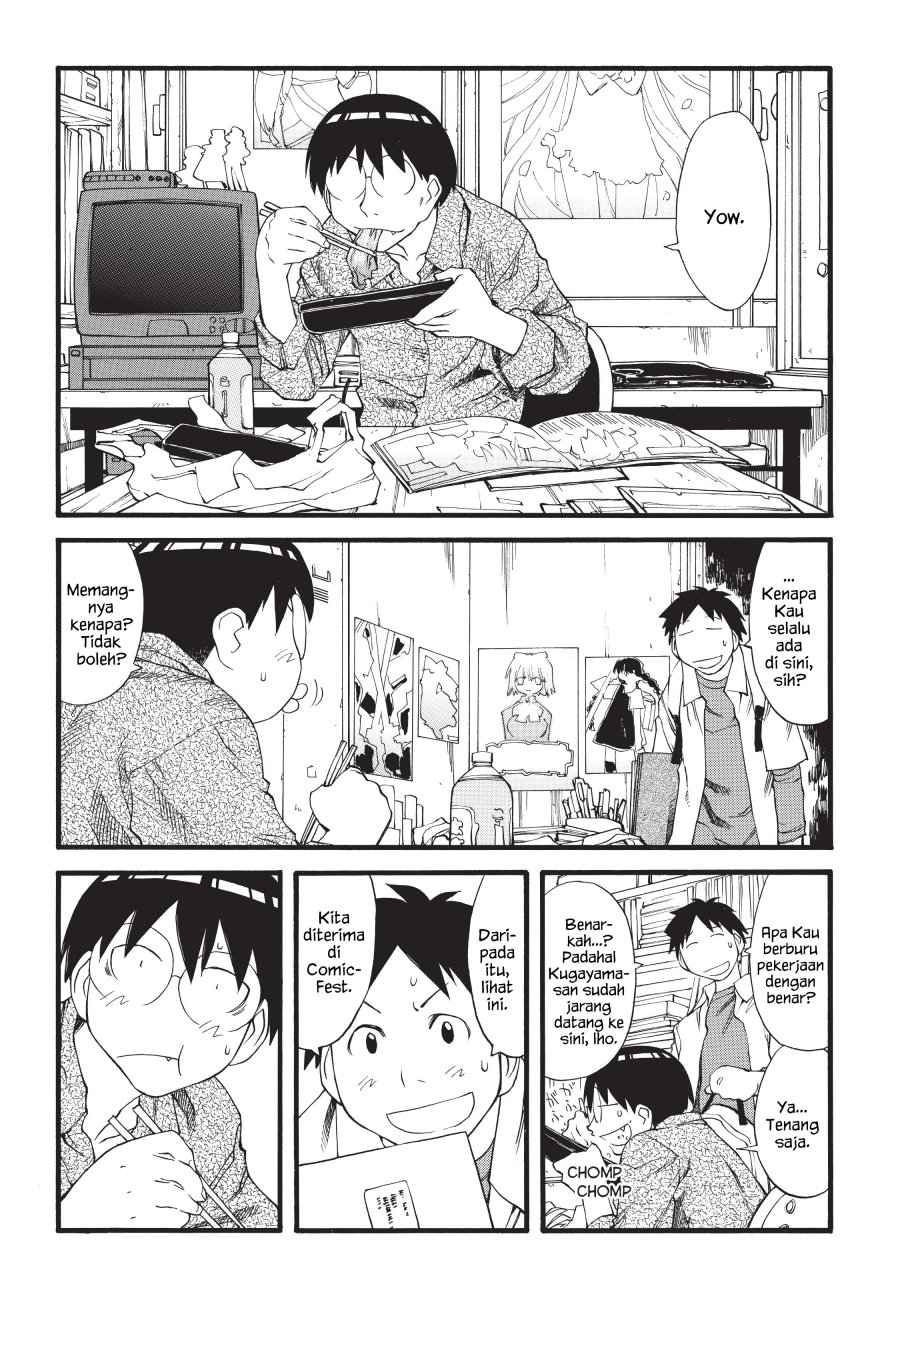 Genshiken – The Society for the Study of Modern Visual Culture Chapter 27 Image 1